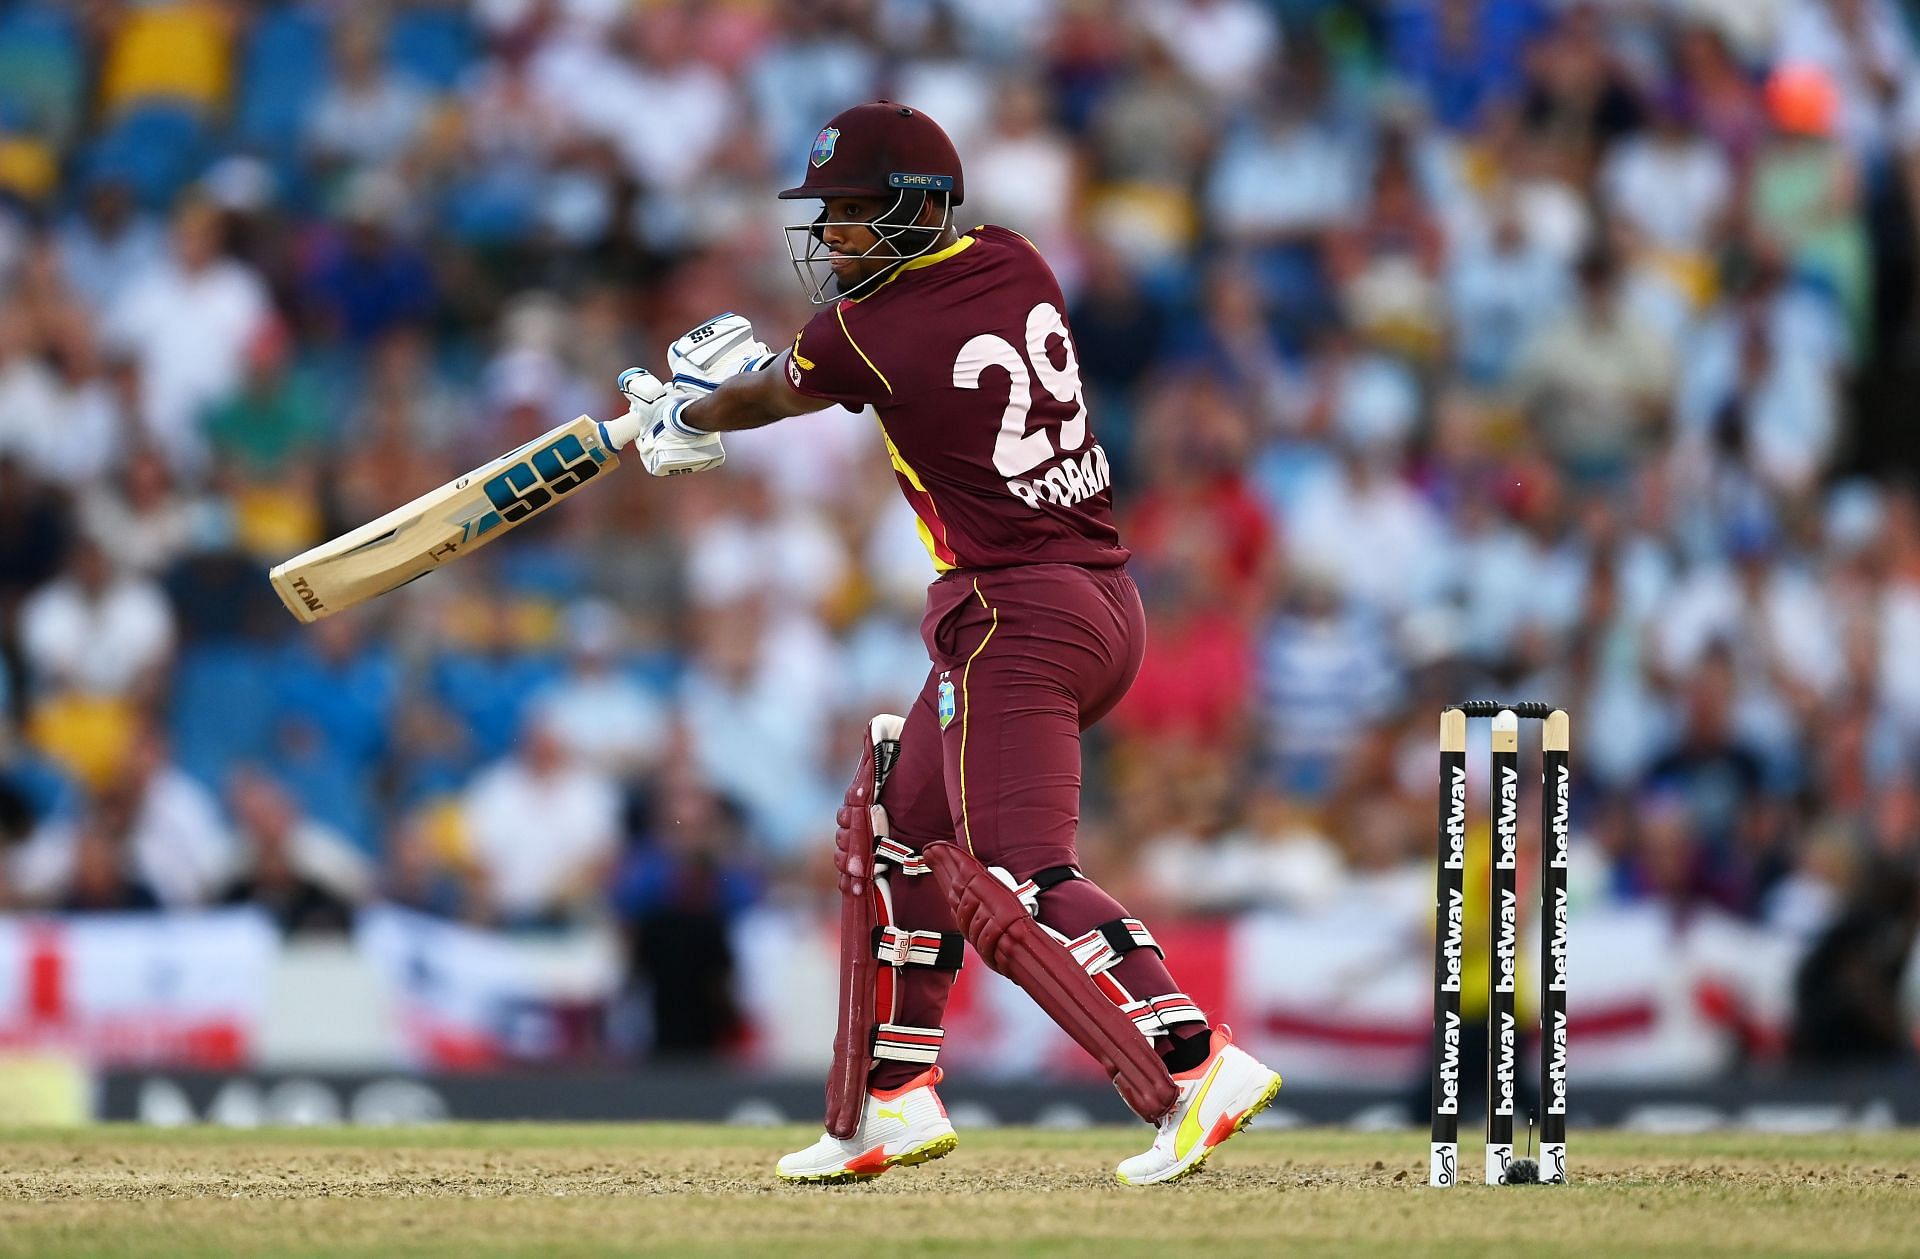 Nicholas Pooran failed to force the pace in the 3rd T20I against India